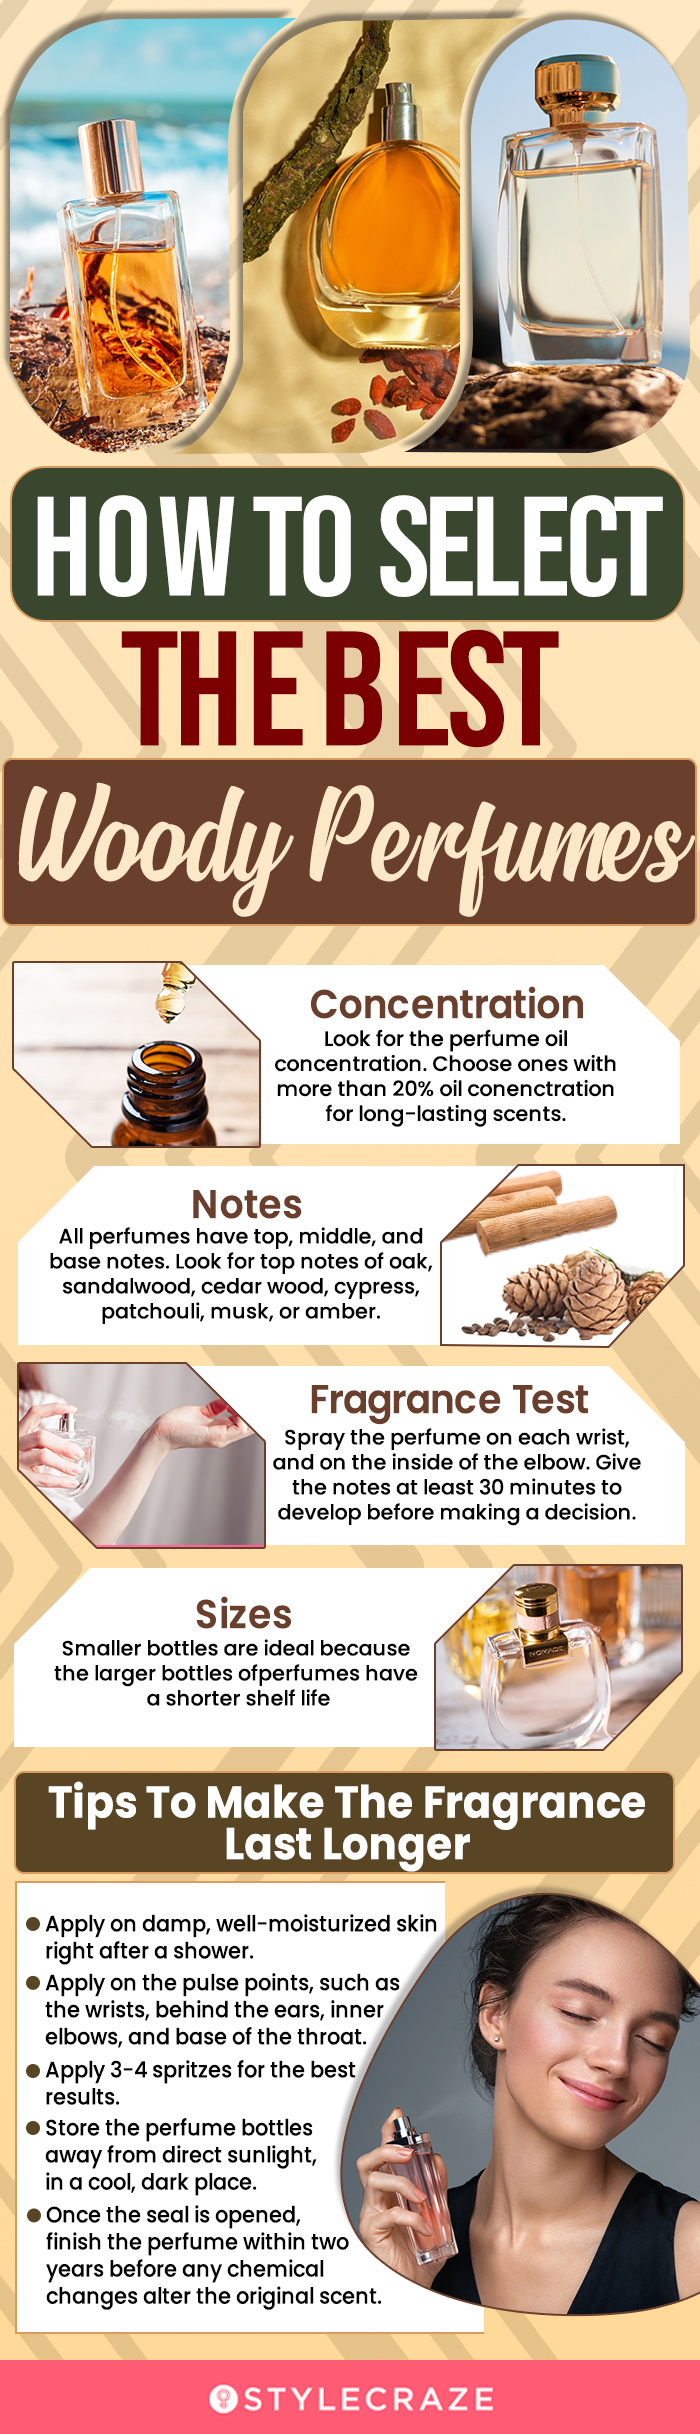 How To Select The Best Woody Perfumes (infographic)